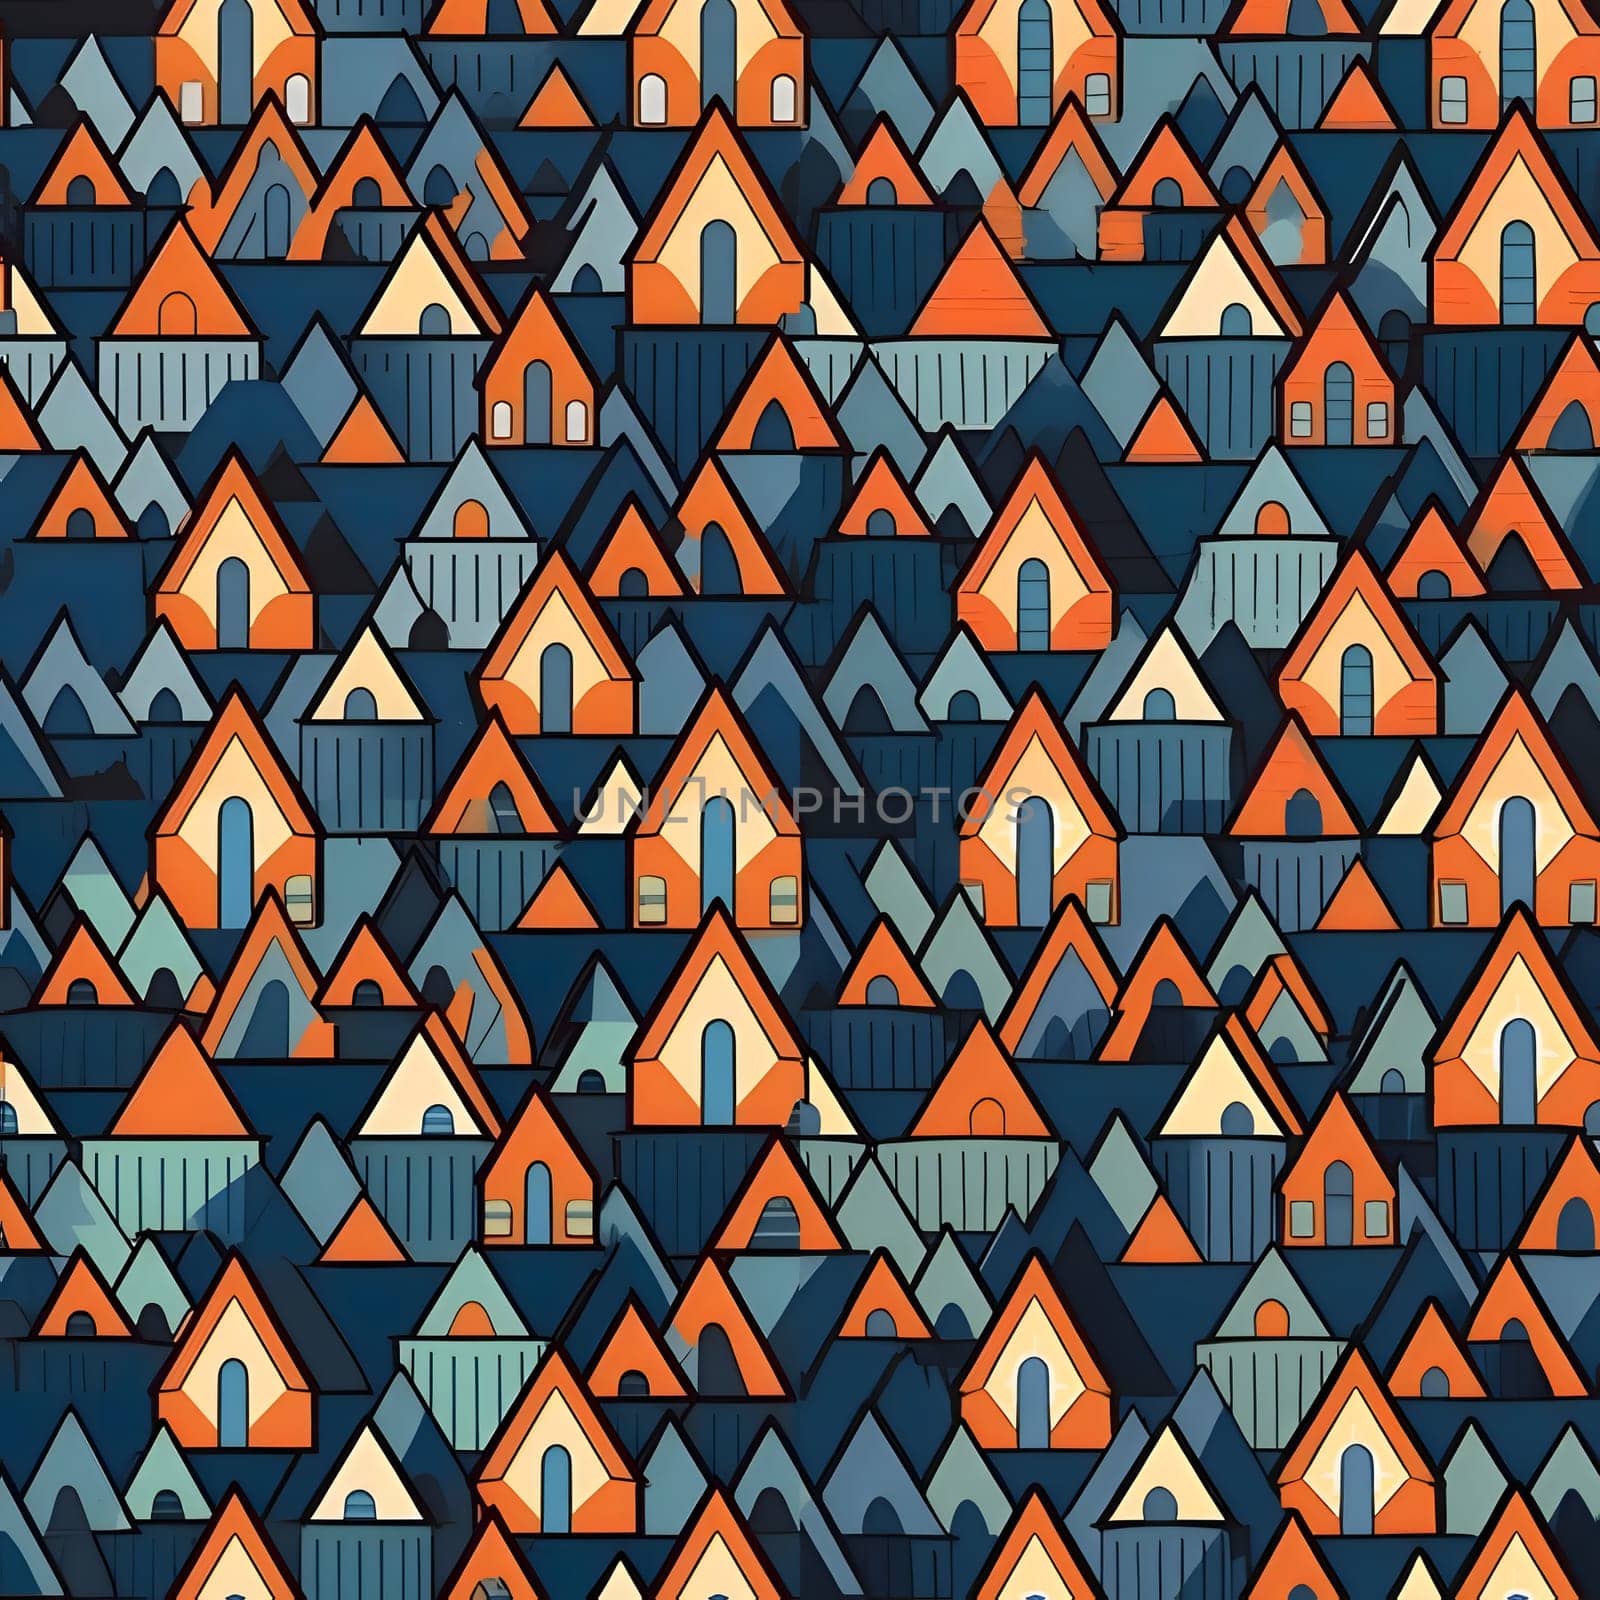 Patterns and banners backgrounds: Seamless pattern with houses in cartoon style. Vector illustration.